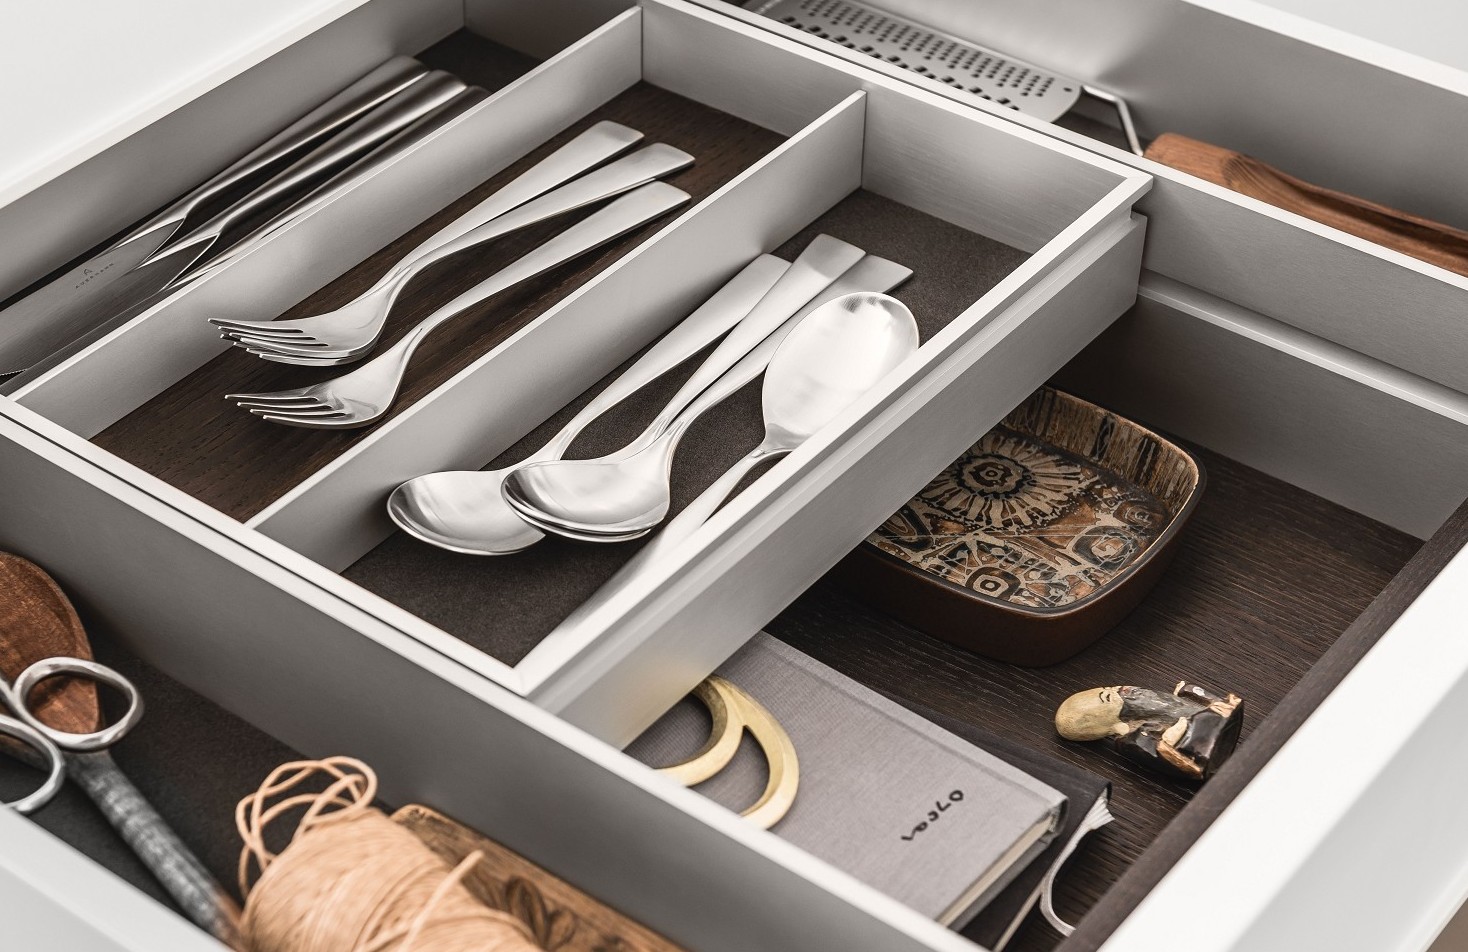 A bi-level drawer elegantly doubles storage space in SieMatic kitchen drawers